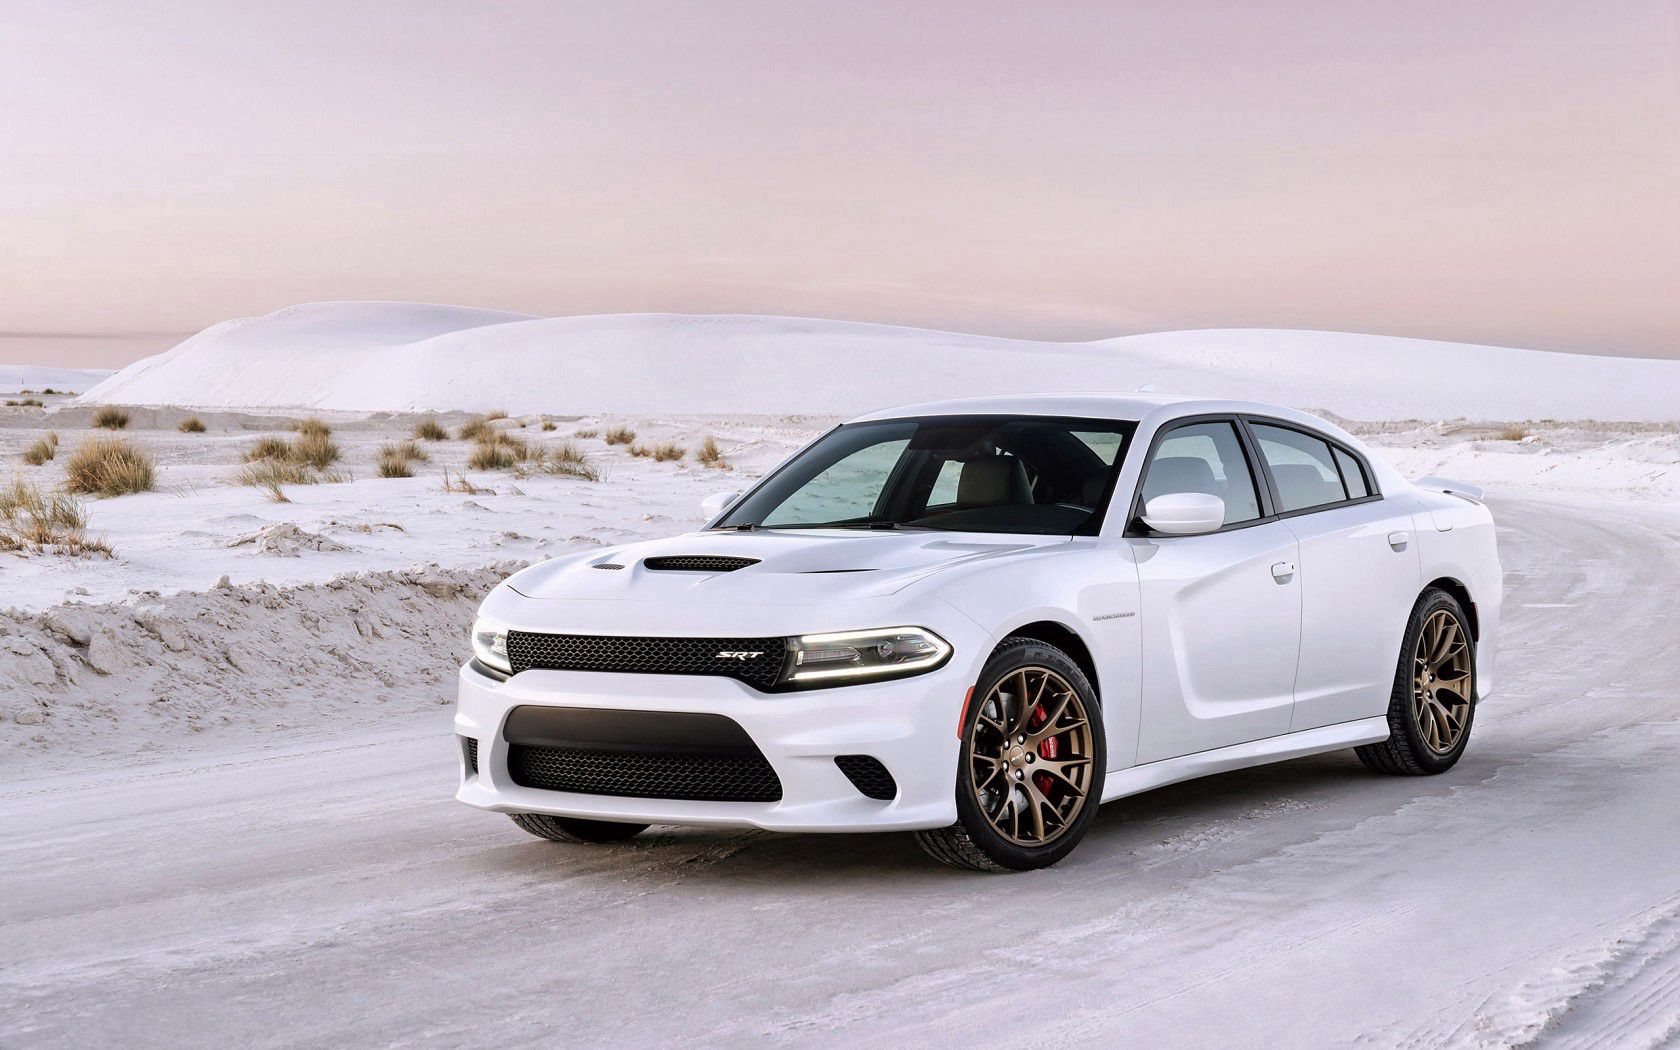 93920 download wallpaper cars, dodge, 2015, srt, charger, hellcat screensavers and pictures for free